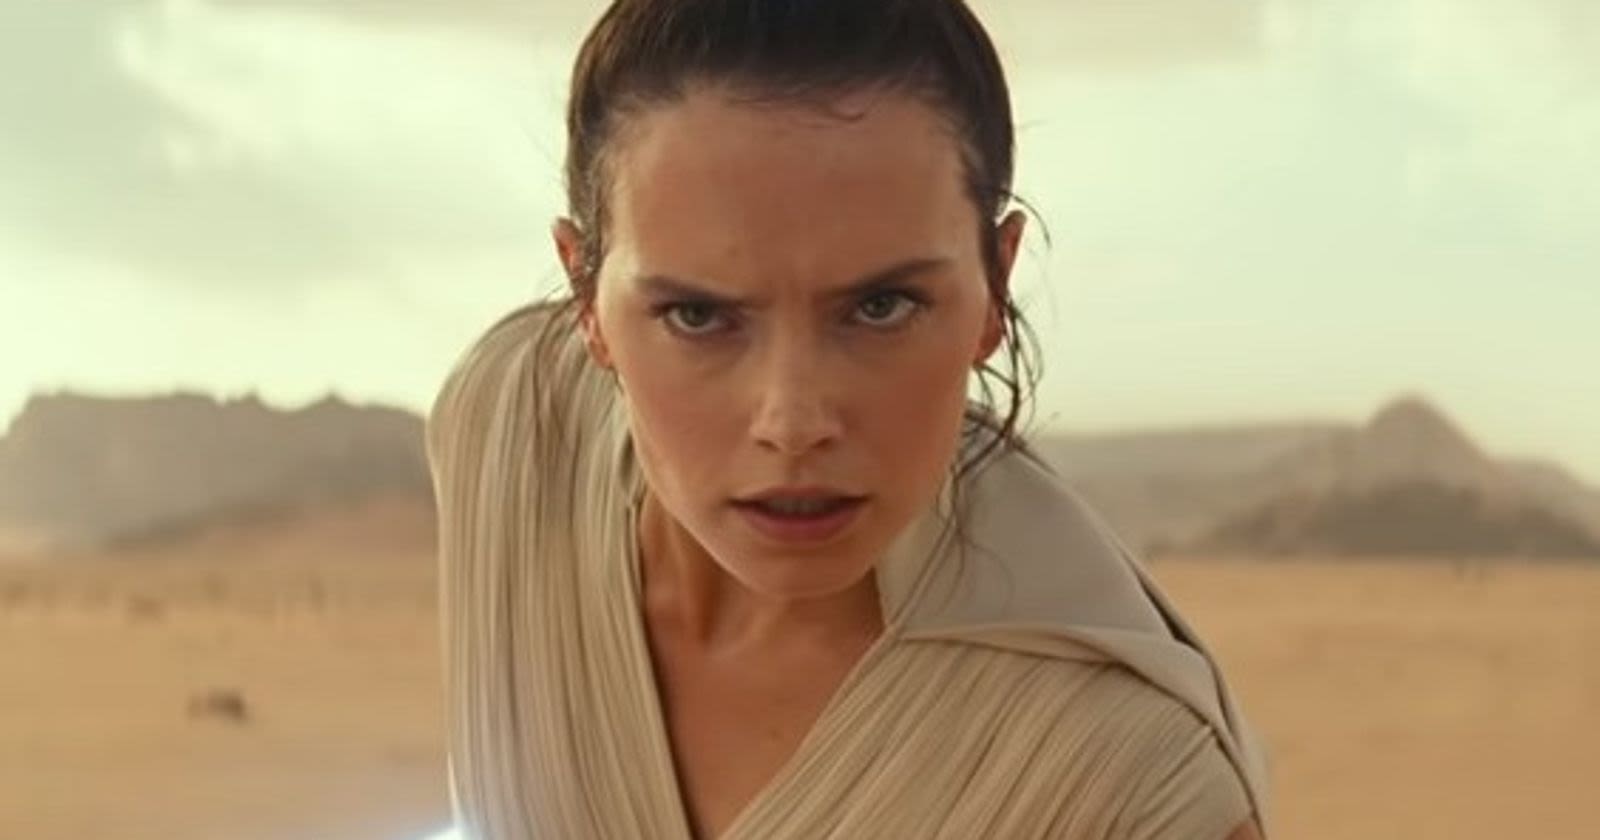 Star Wars Director is Well Aware of the Backlash Against New Daisy Ridley Movie